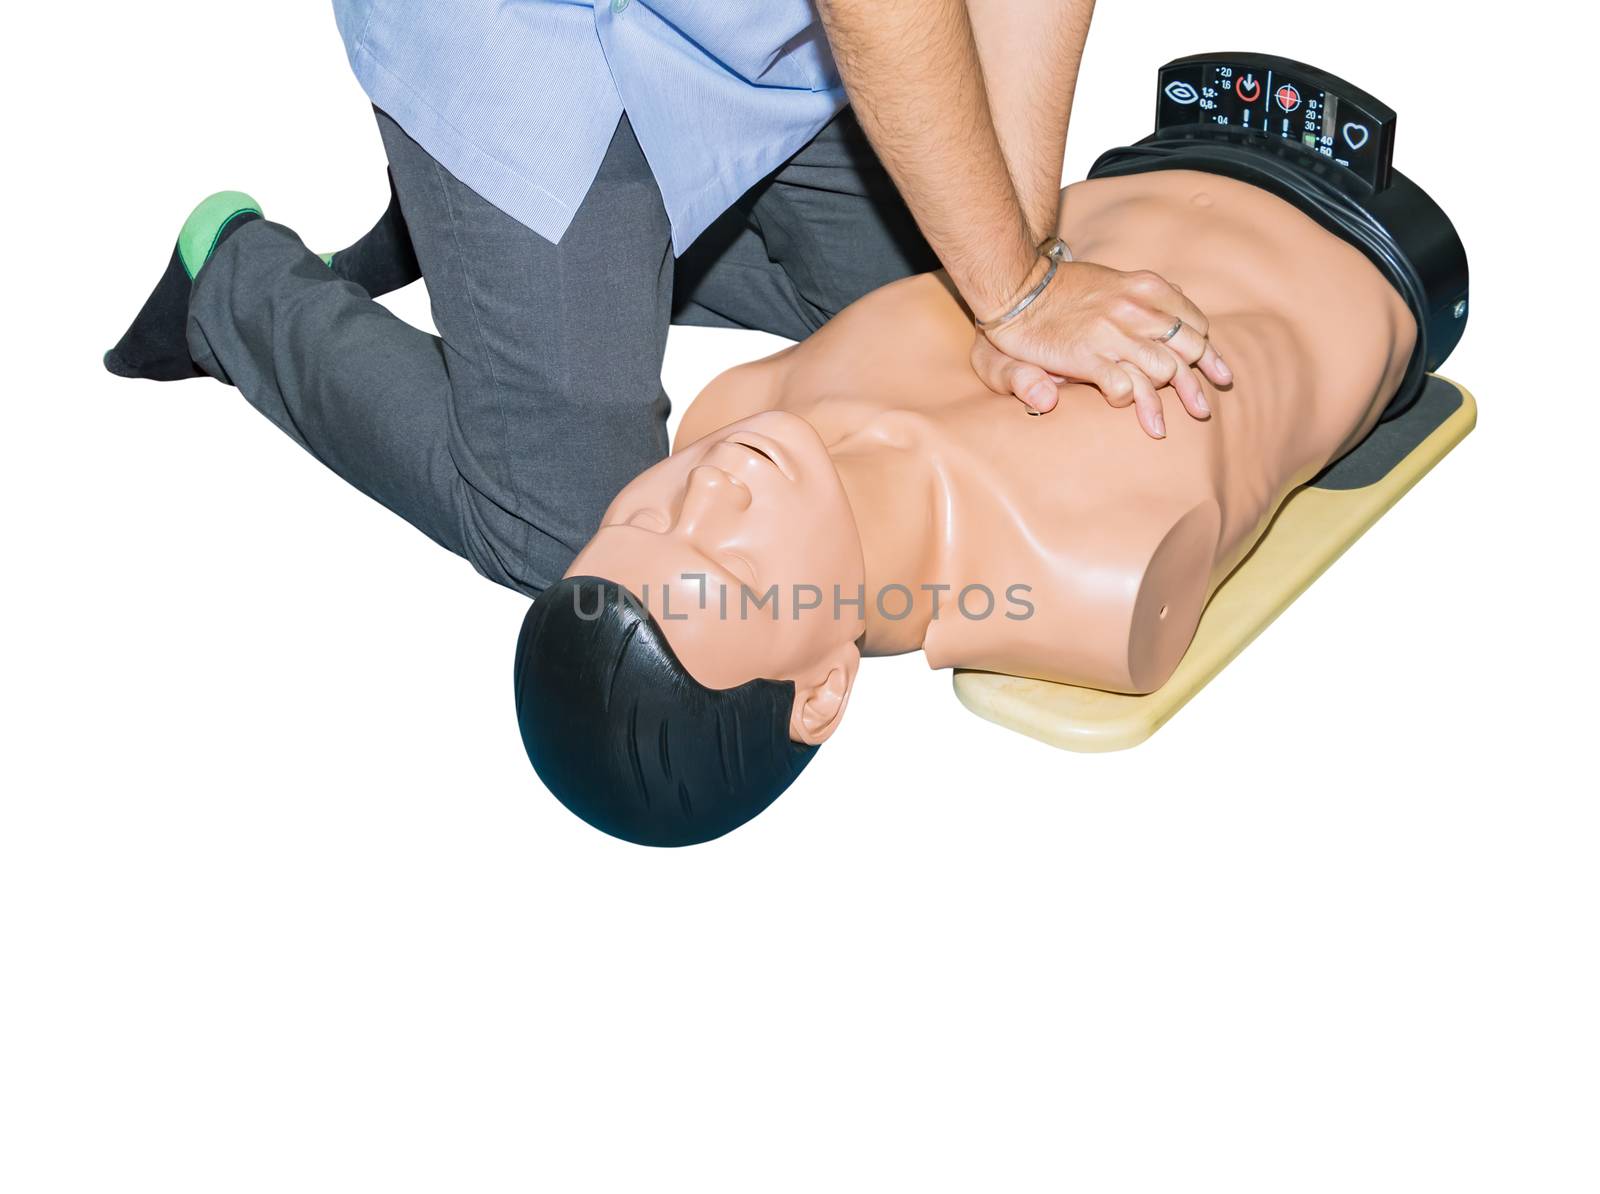 CPR aid dummy medical training with hand press Heart on doll emergency refresher training Concept closed-up. isolated on white background